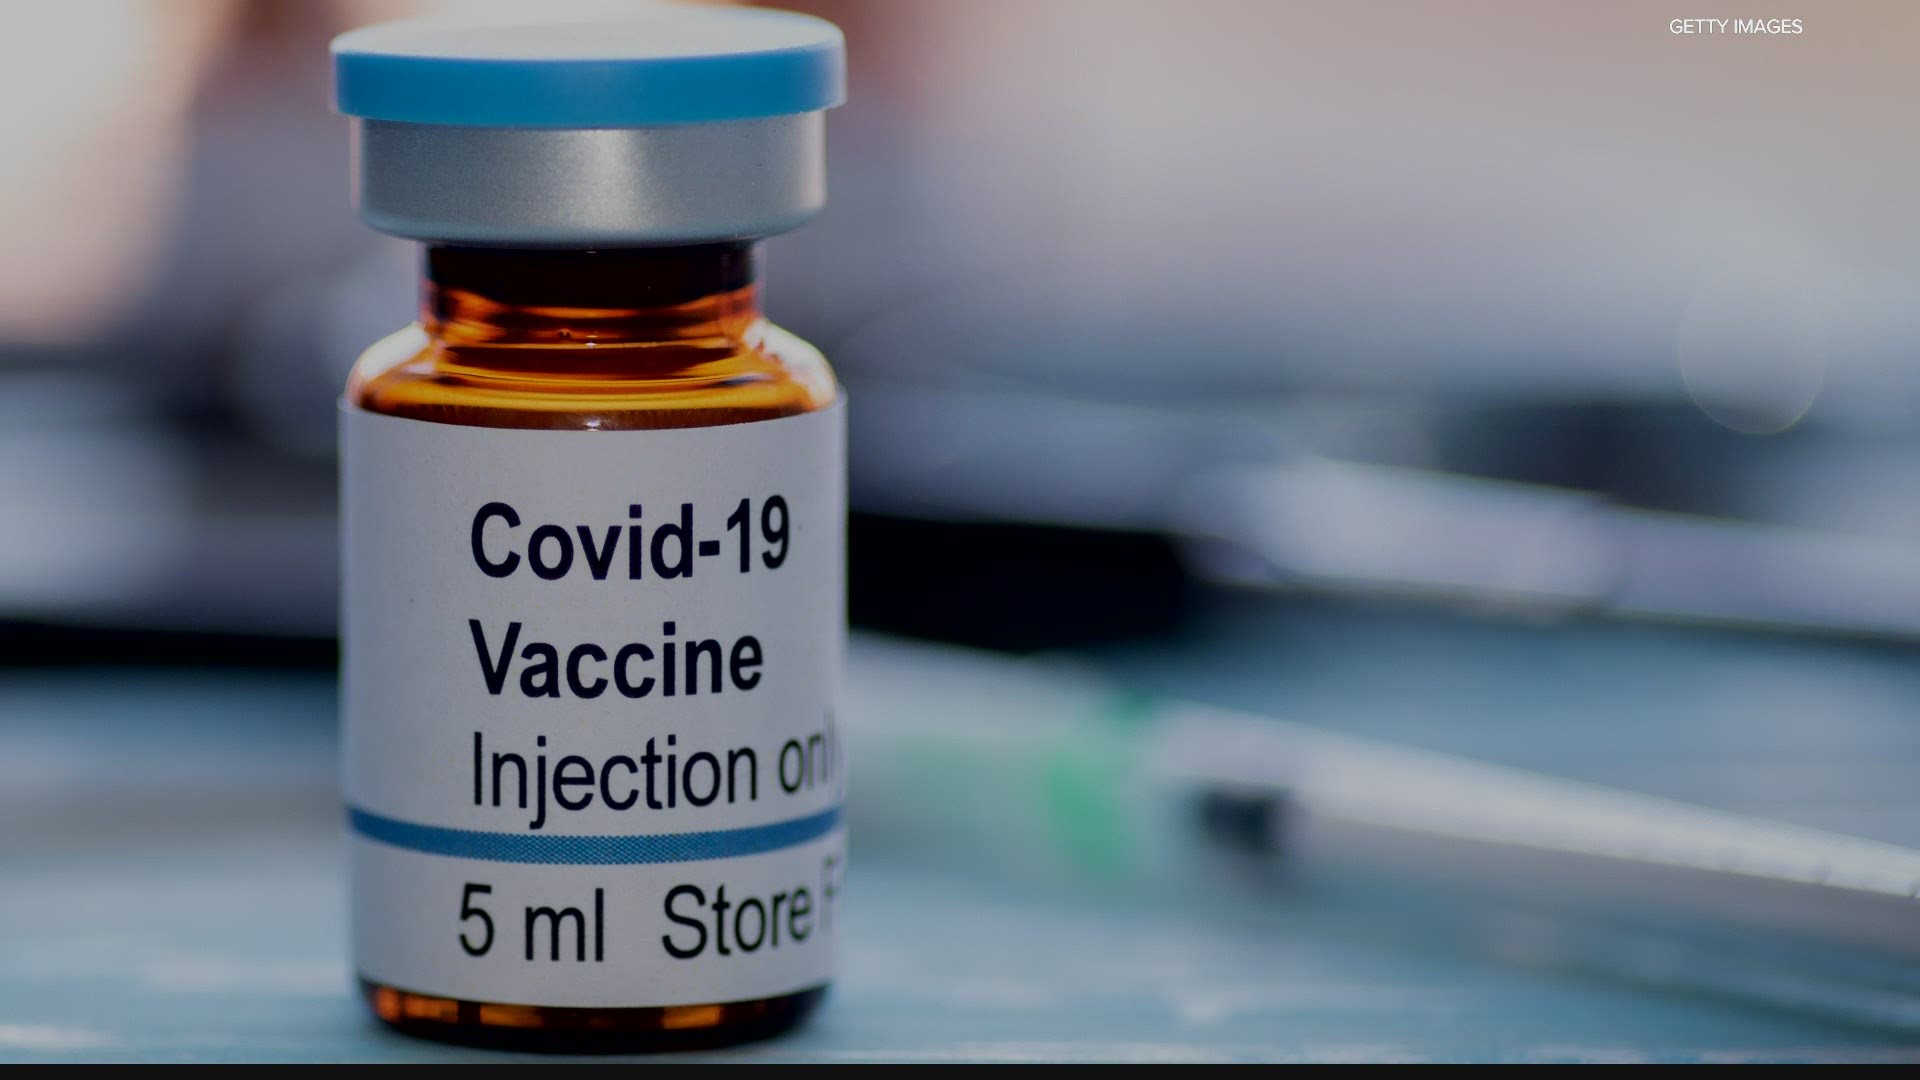 Health care workers and residents of long-term care facilities in Indiana could receive the COVID-19 vaccine by the end of the month.